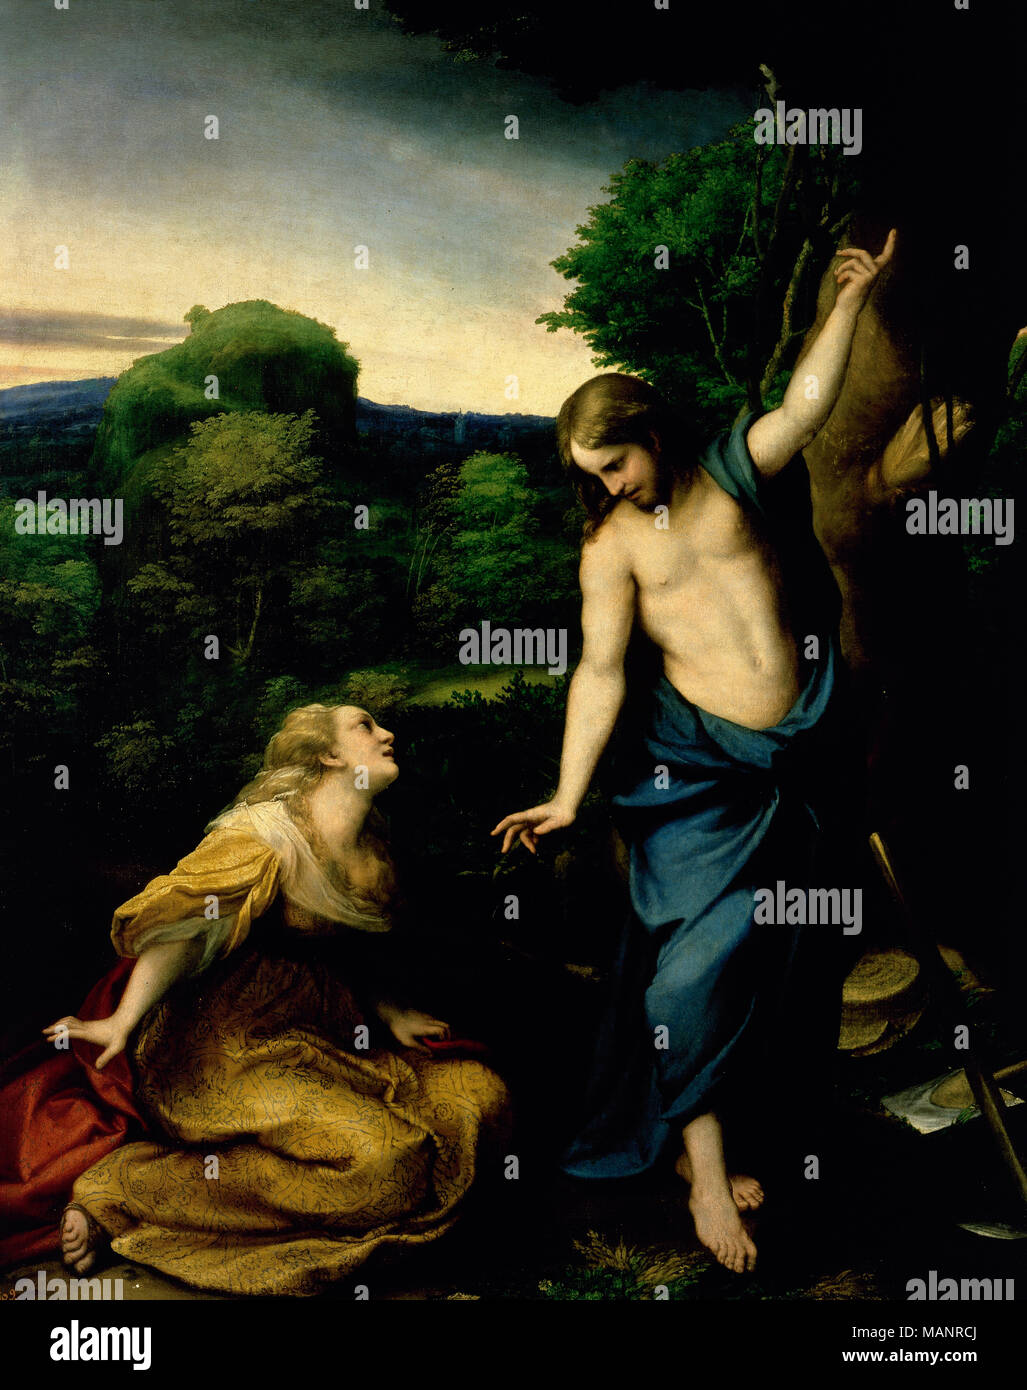 Noli me tangere, c.1525, by Correggio (1494-1534), byname of Antonio Allegri, an Italian painter of the Renaissance. Noli me tangere was a sentence spoken by Jesus to Mary Magdalene when she recognized him after his resurrection. Prado Museum. Madrid, Spain. Stock Photo